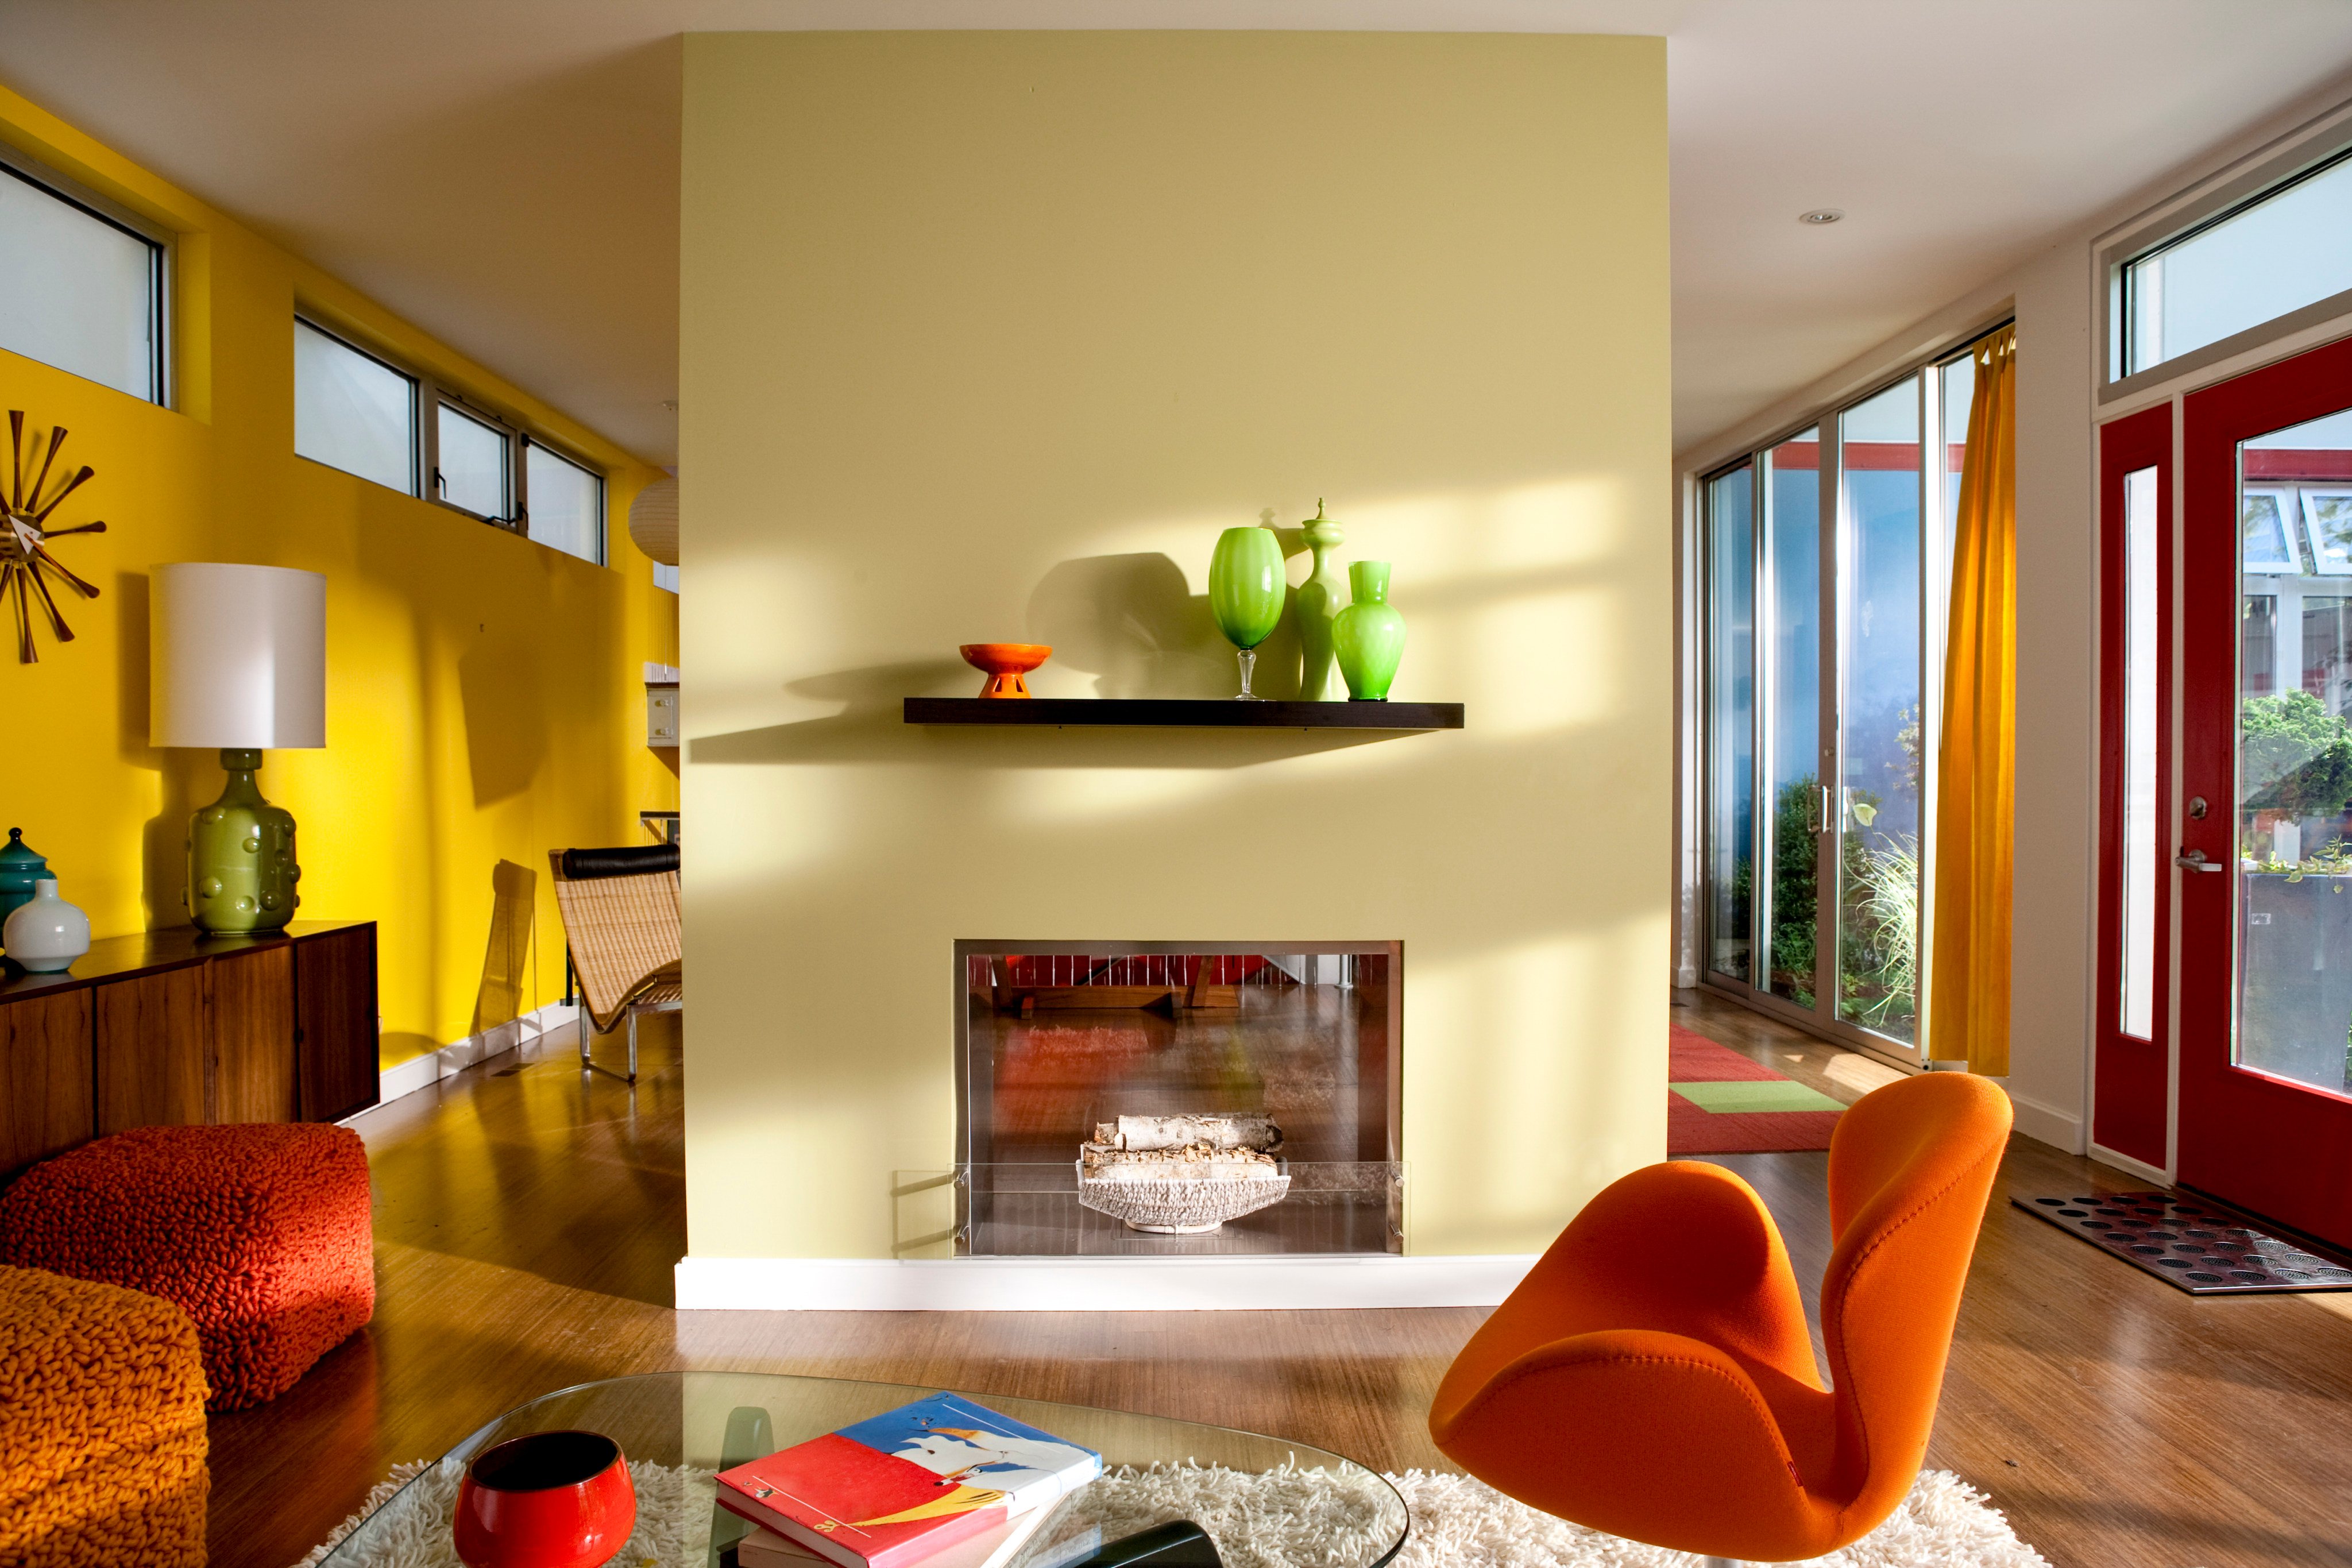 Lively shades are replacing grey tones in interior themes. Photo: Getty Images